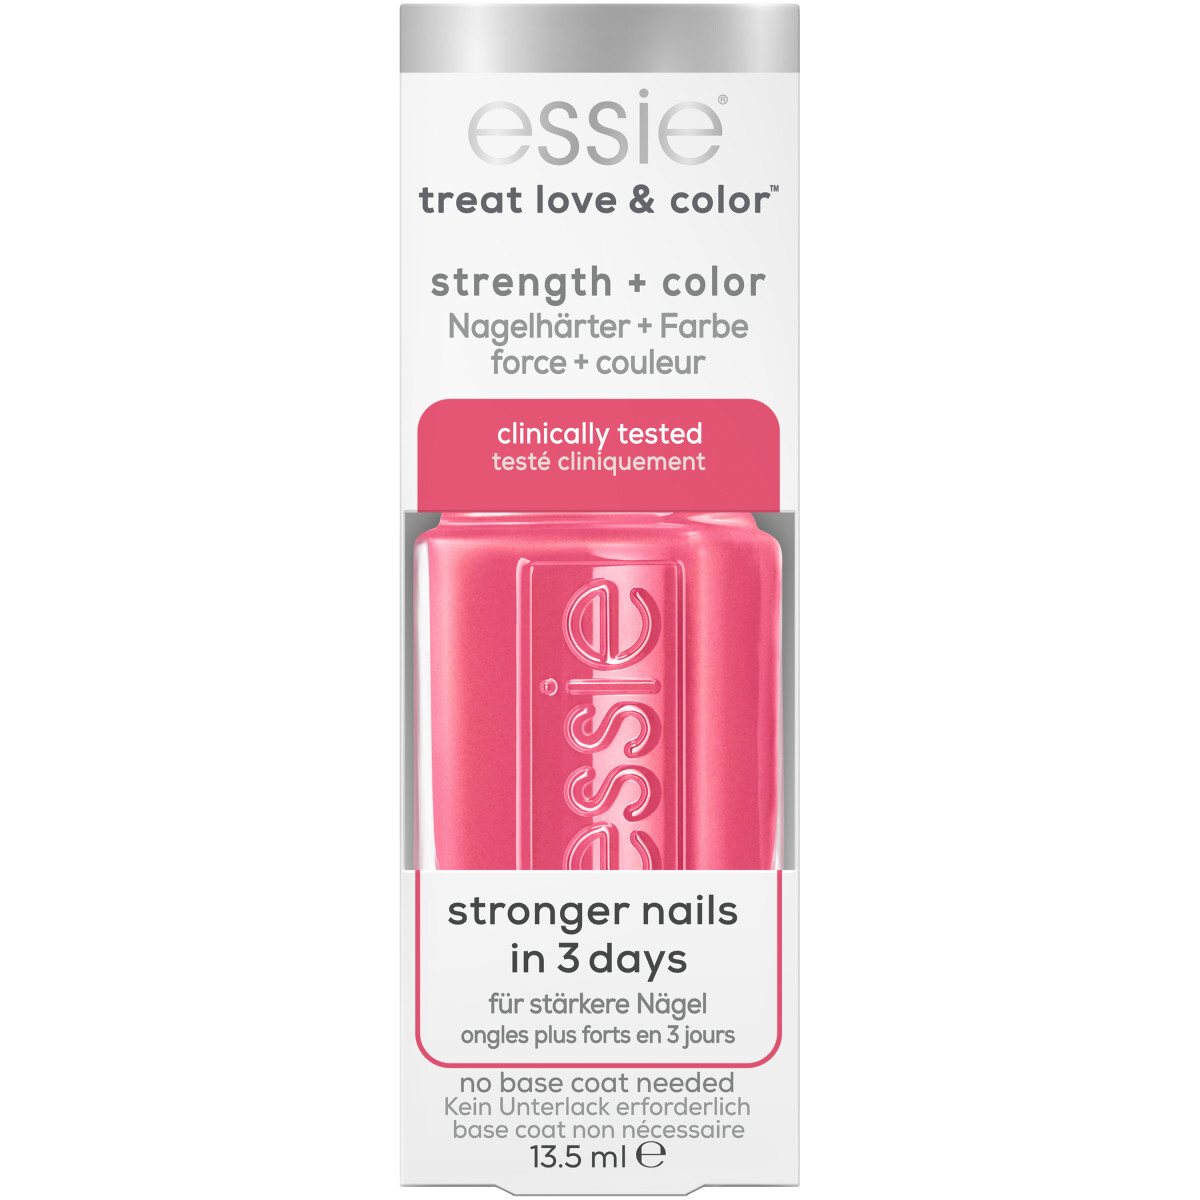 Essie treat love & color - TREAT LOVE & COLOR - 162 punch it up - roze - shimmer nagelverharder met calcium & camellia-extract - 13,5 ml